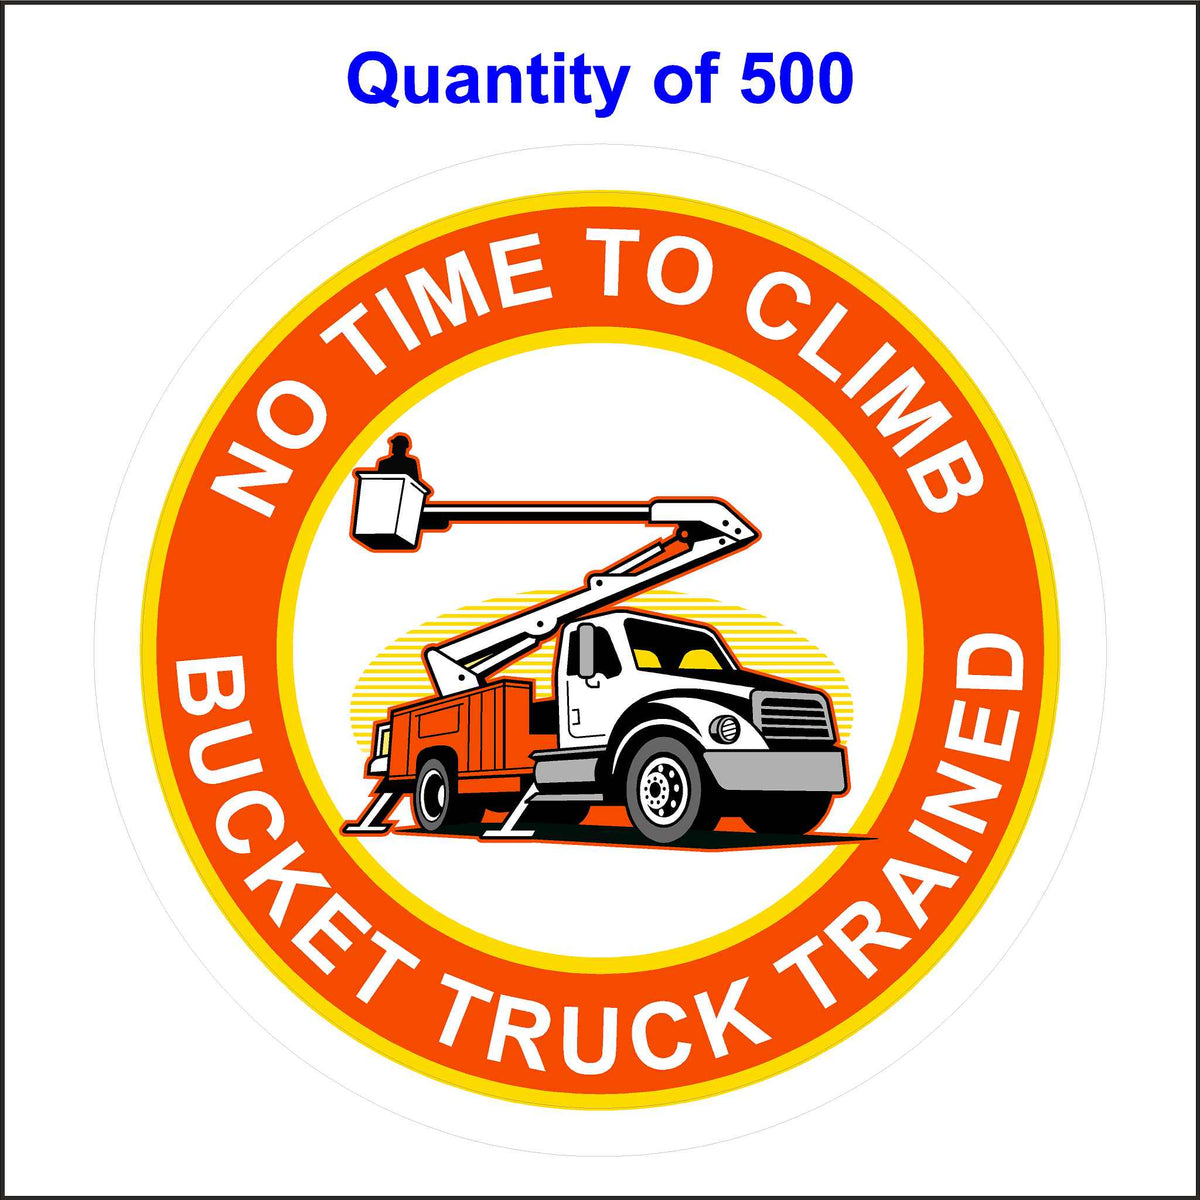 No Time To Climb Bucket Truck Trained Stickers. 500 Quantity.